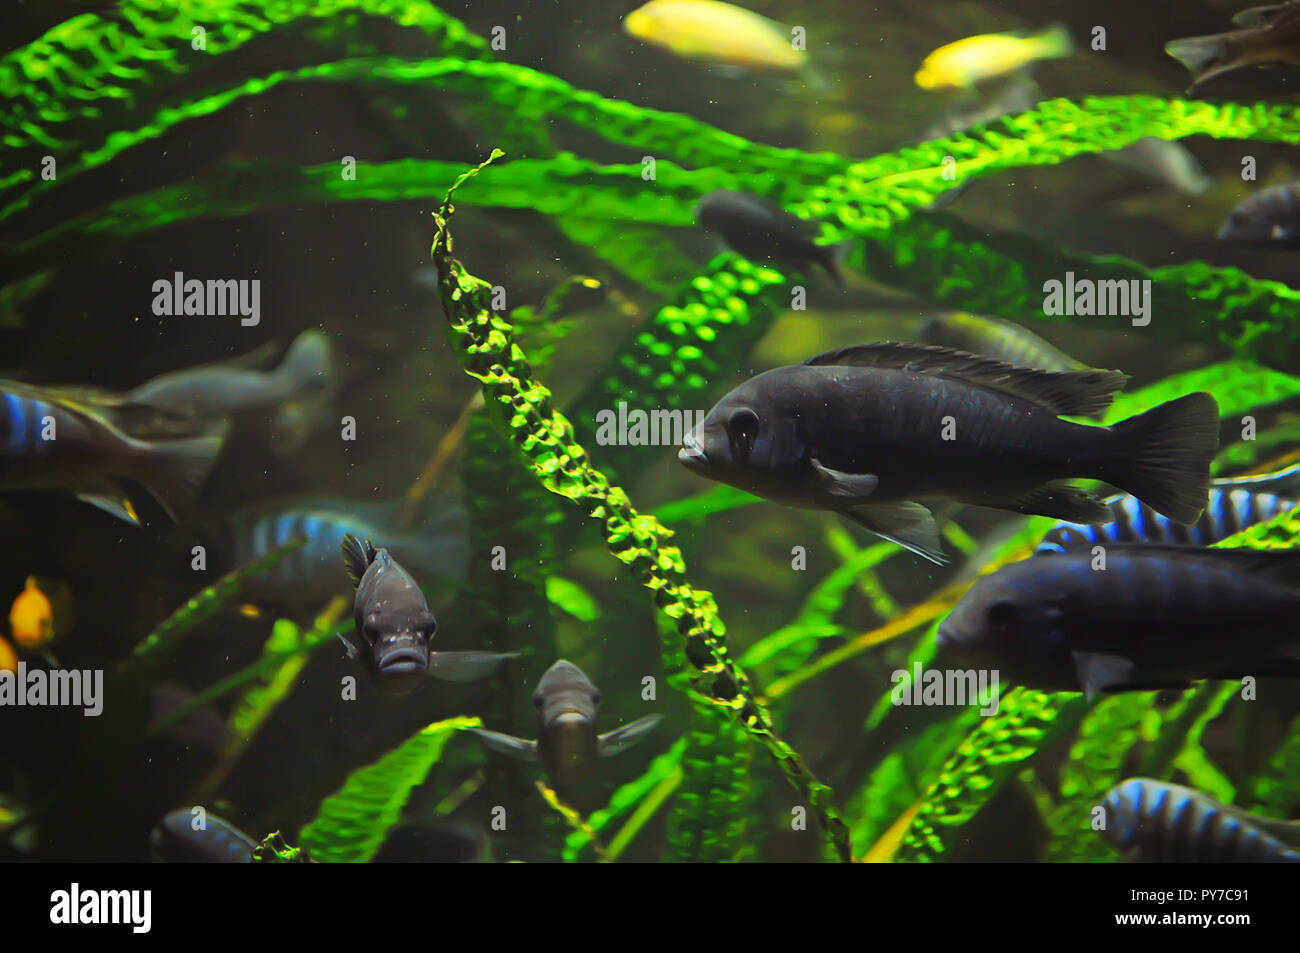 Many gray fish in the aquarium among high green seaweed and tiny speckles Stock Photo